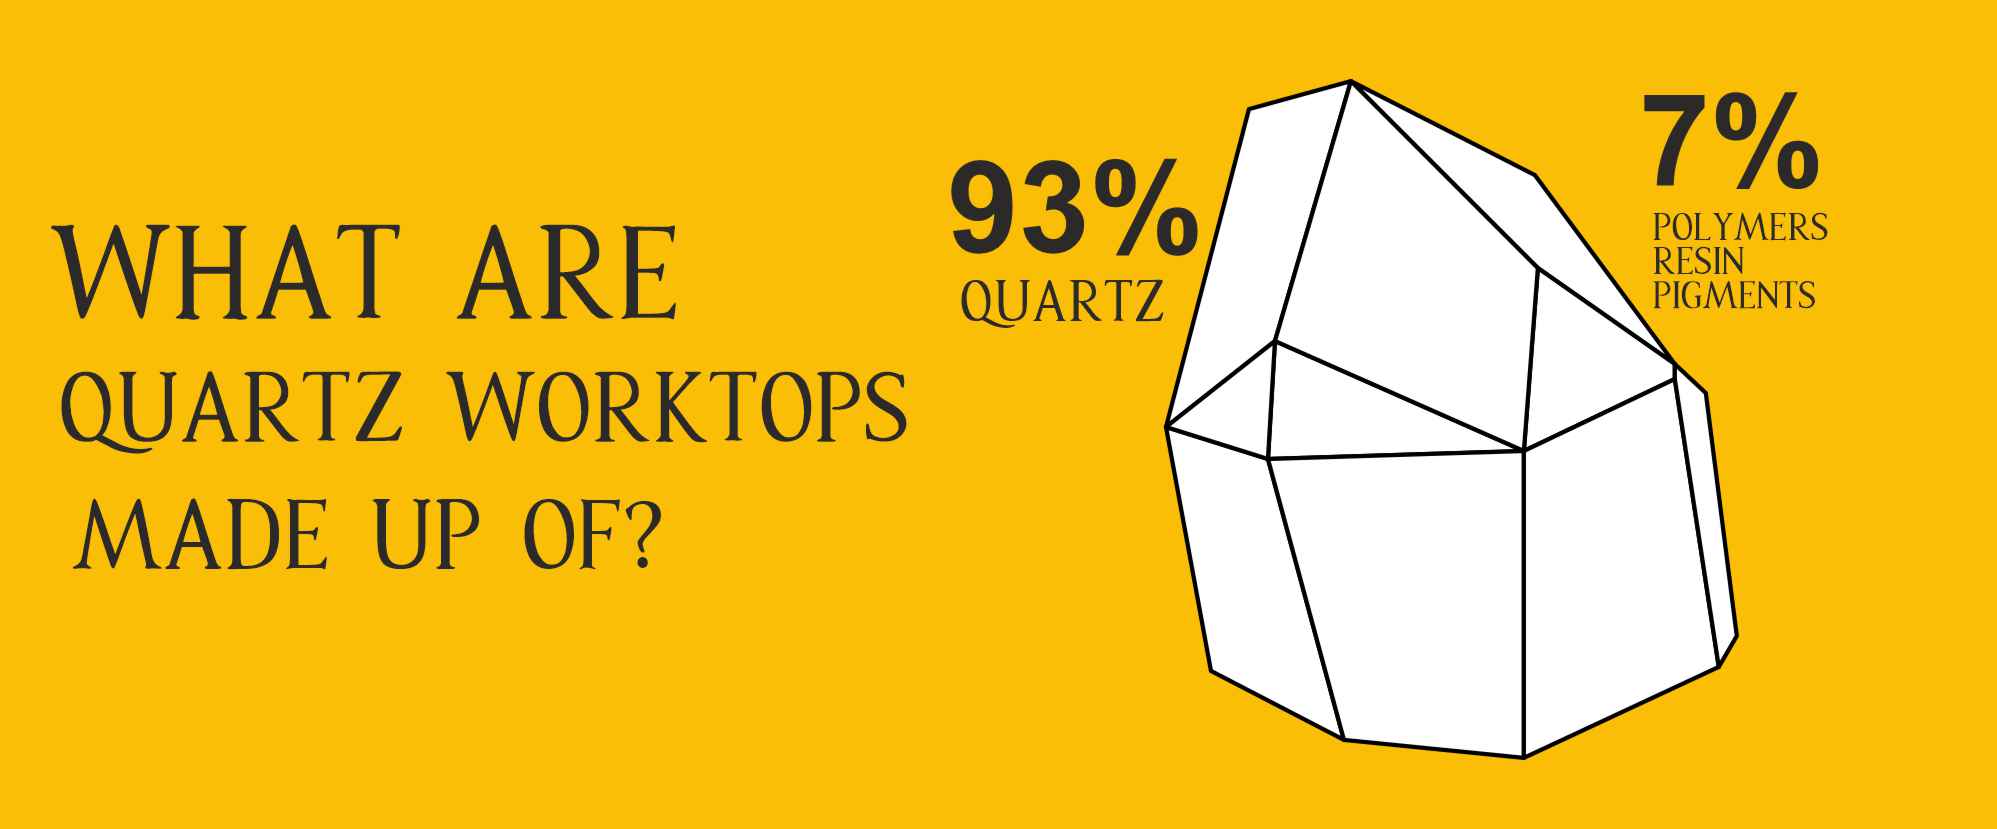 WHAT ARE QUARTZ WORKTOPS MADE UP OF